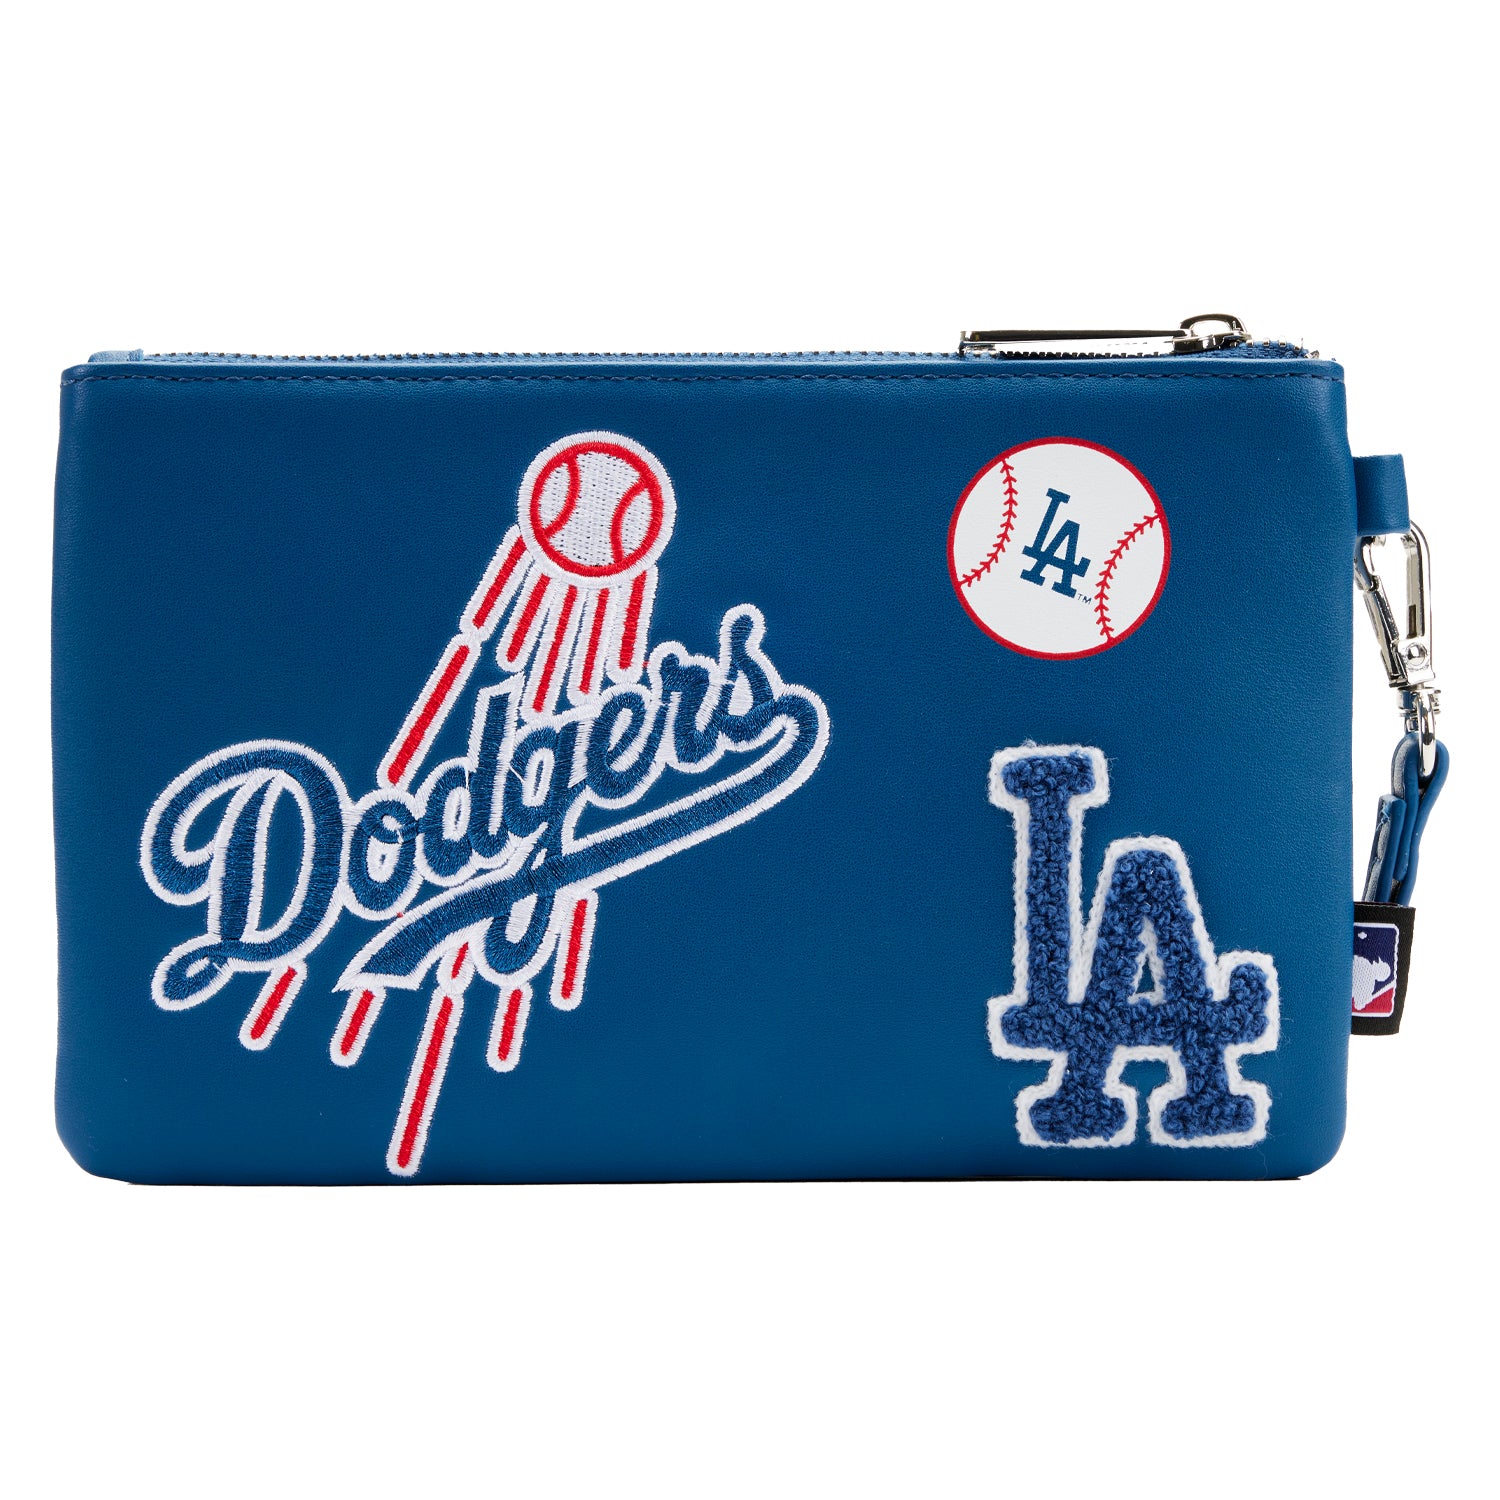 people selling clear bags outside dodger stadium｜TikTok Search